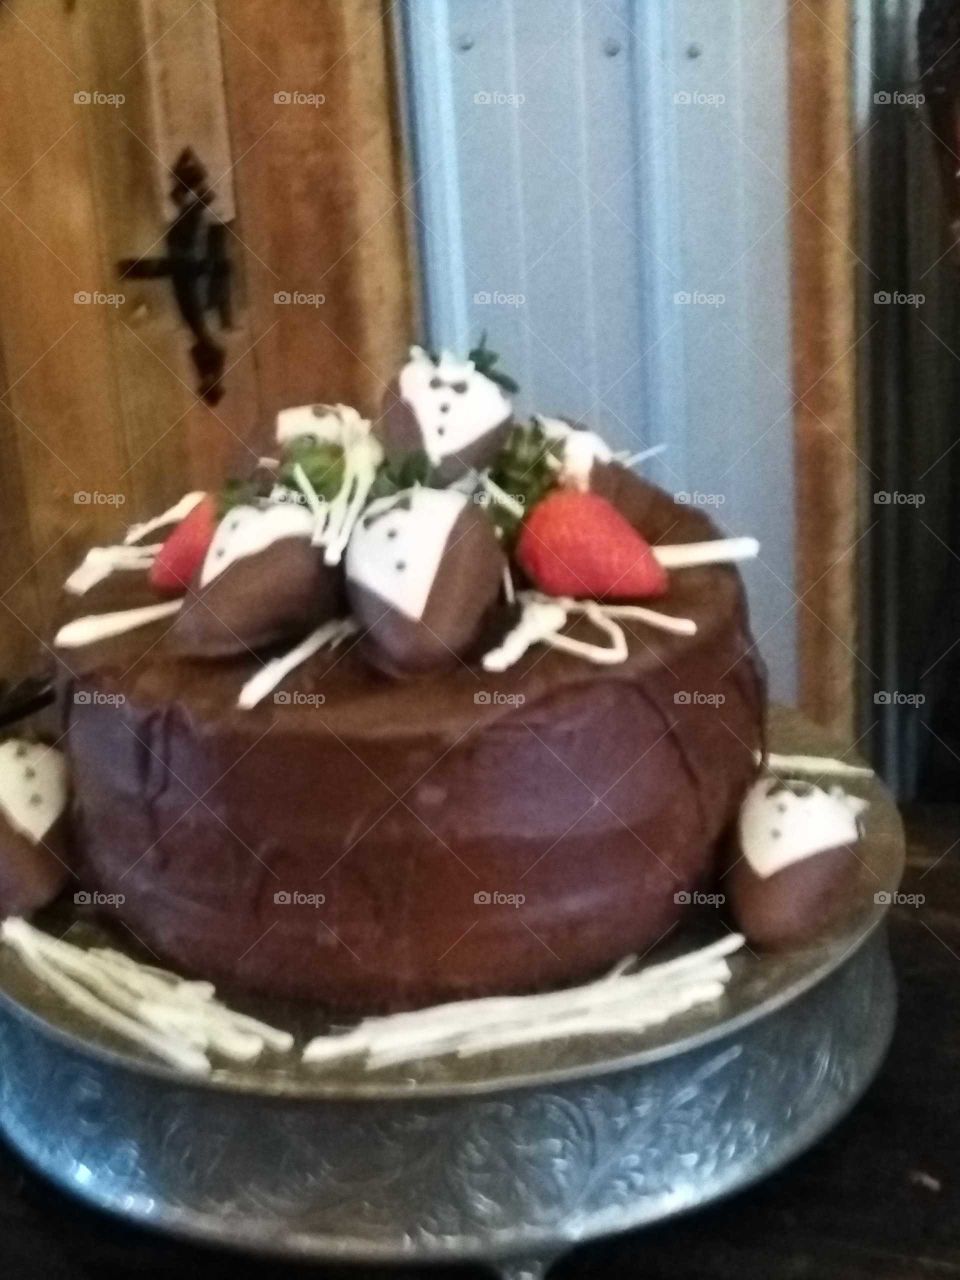 delicious chocolate on chocolate cake with tuxedo strawberries